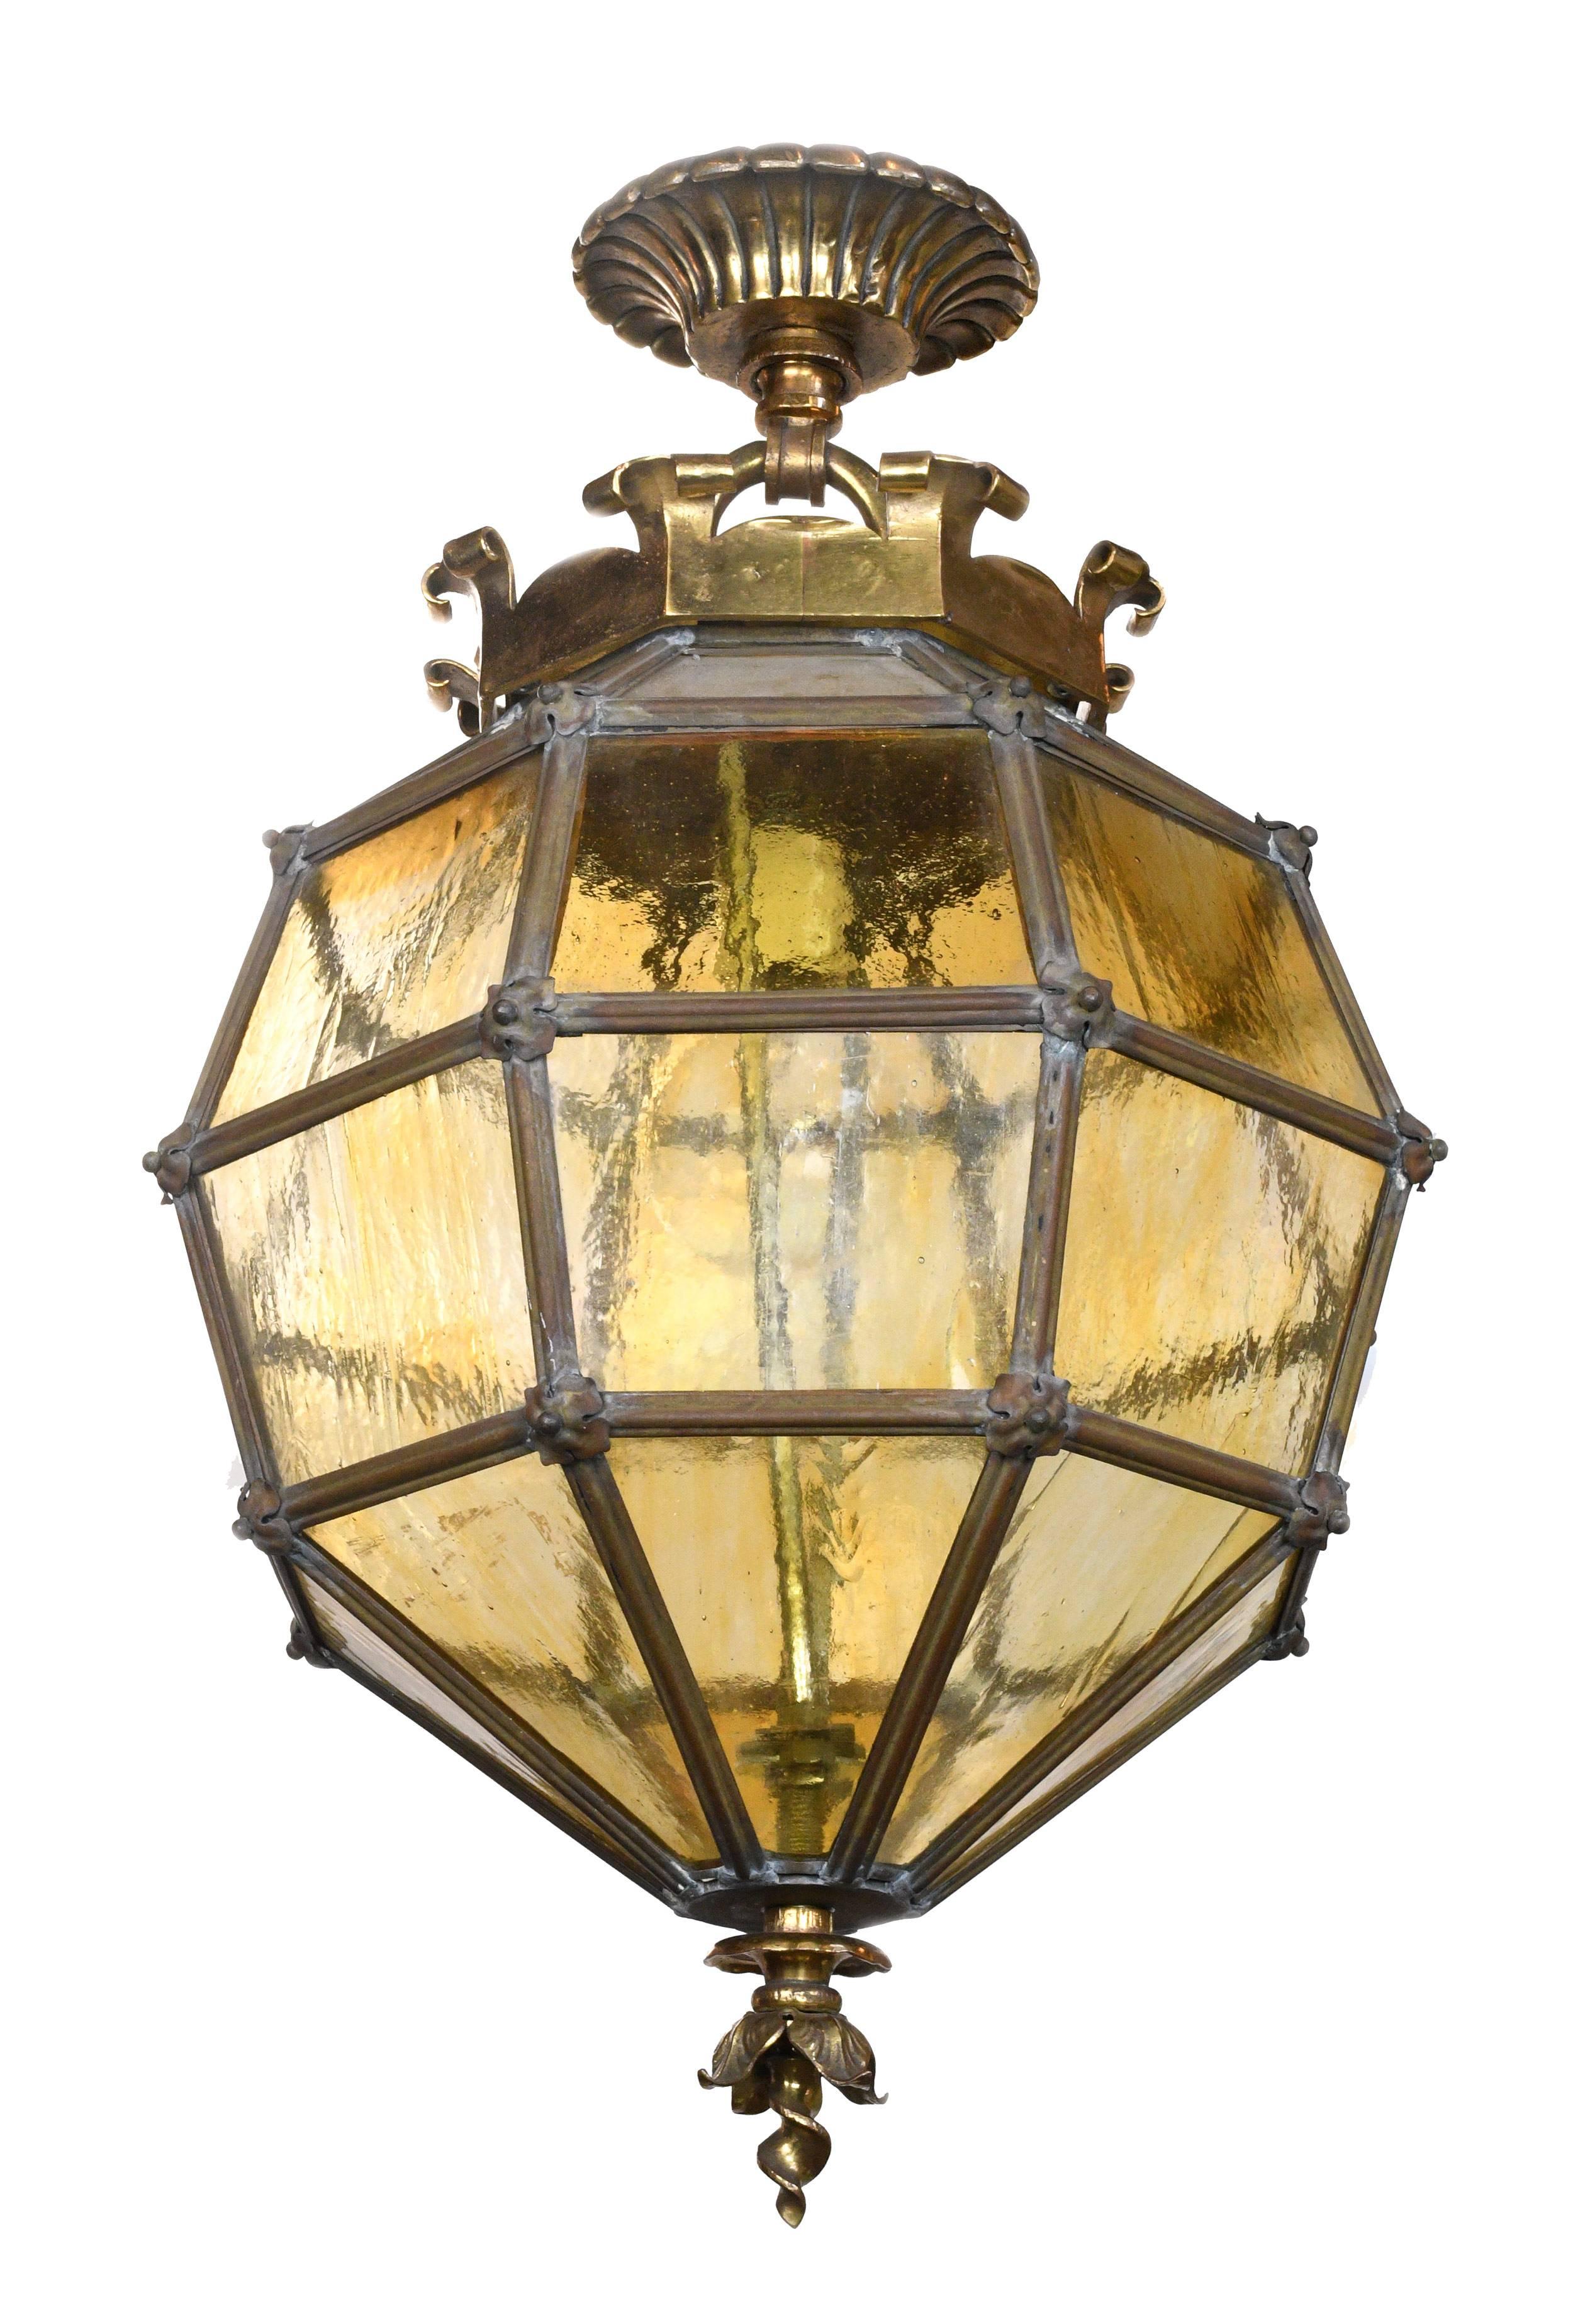 Thirty two yellow glass panels are arranged in an octagonal shape, lending this fixture a stylish, modern air. A cast brass, crown-like canopy adorns the top, and a leafy finial rounds out the bottom. Between each panel of glass is a delicate metal